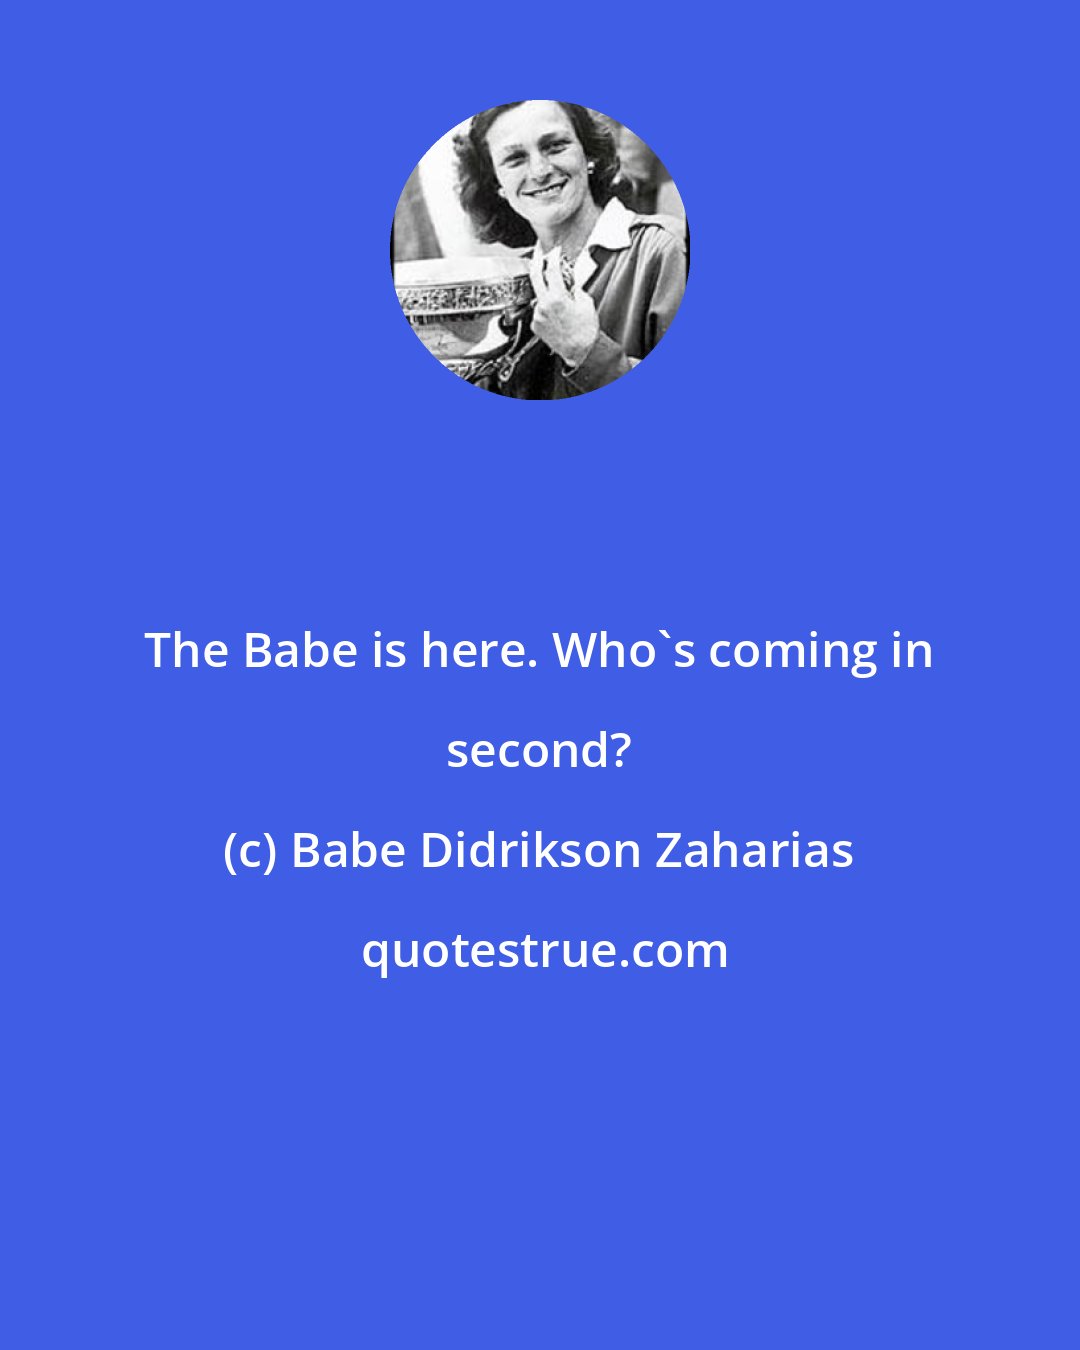 Babe Didrikson Zaharias: The Babe is here. Who's coming in second?